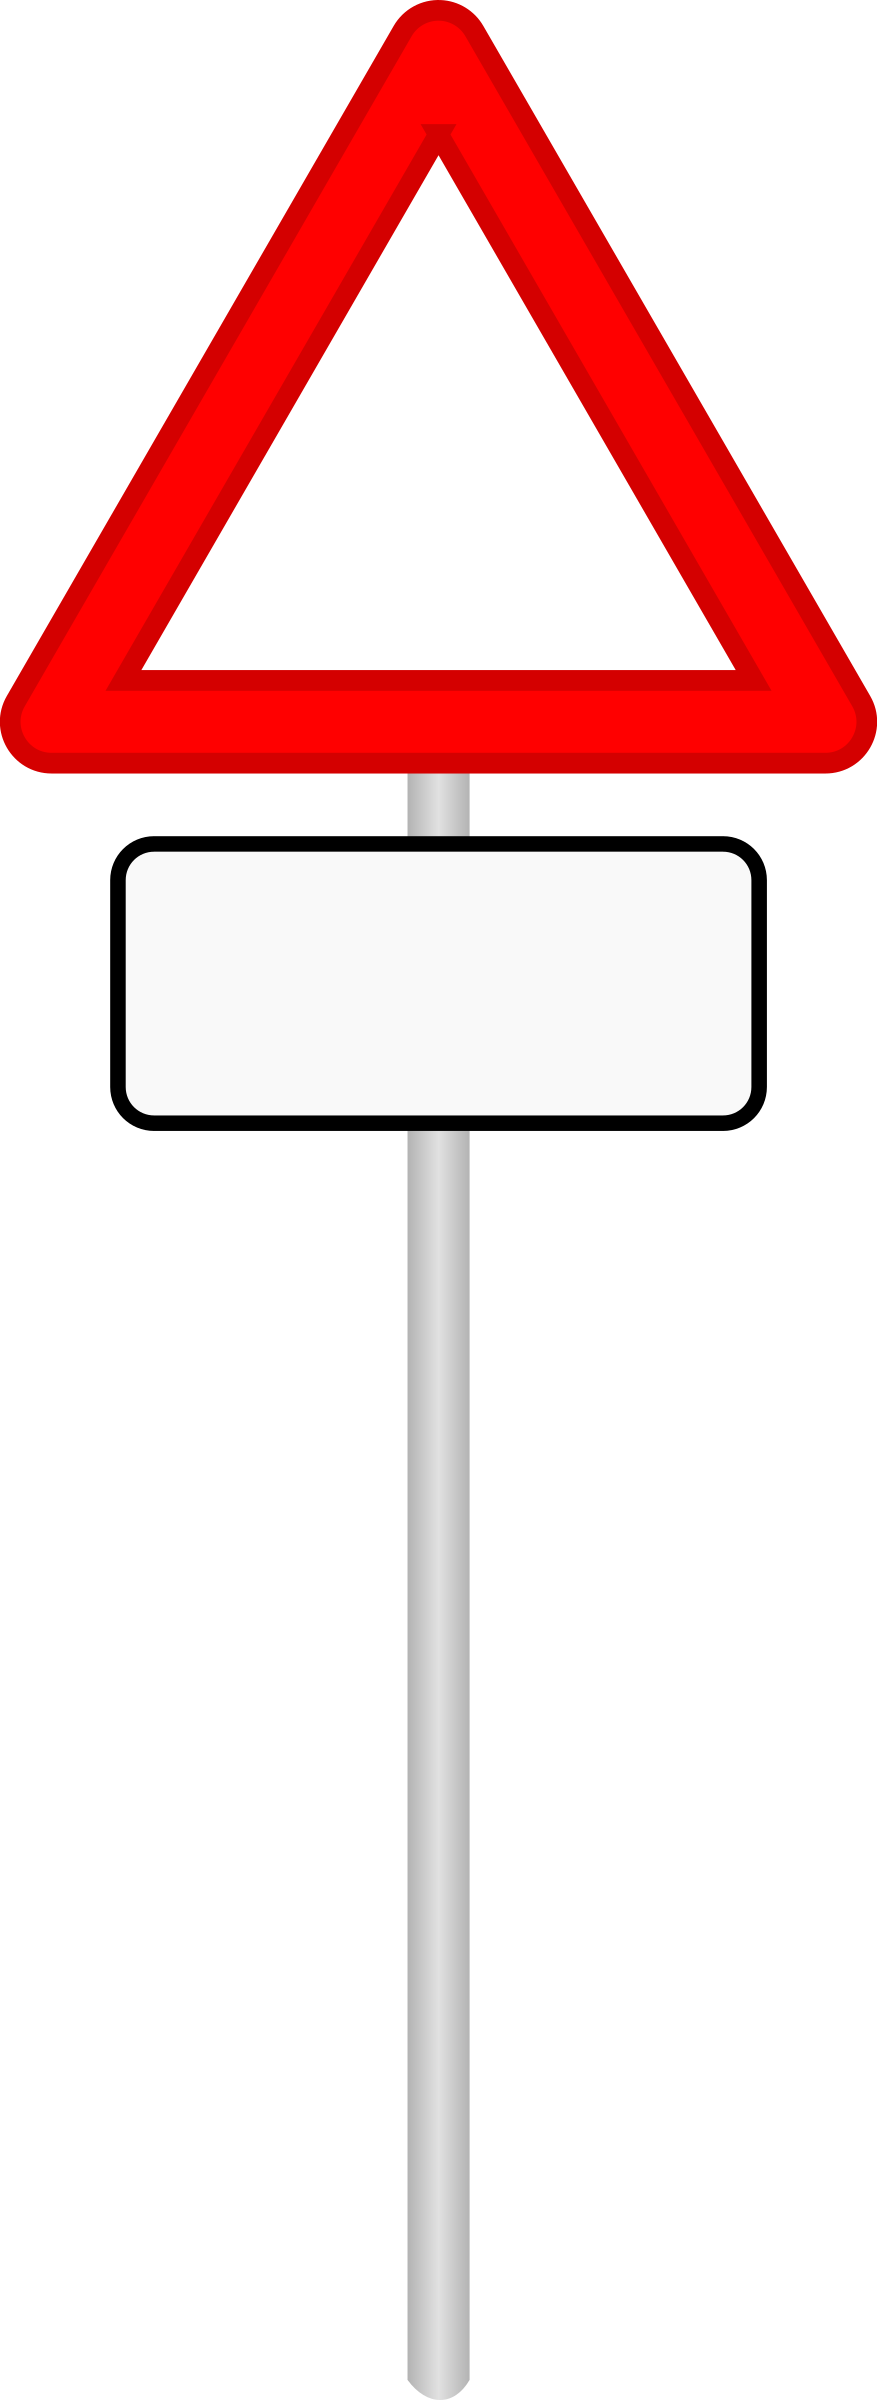 Free Road Sign Template Download Free Road Sign Template Png Images